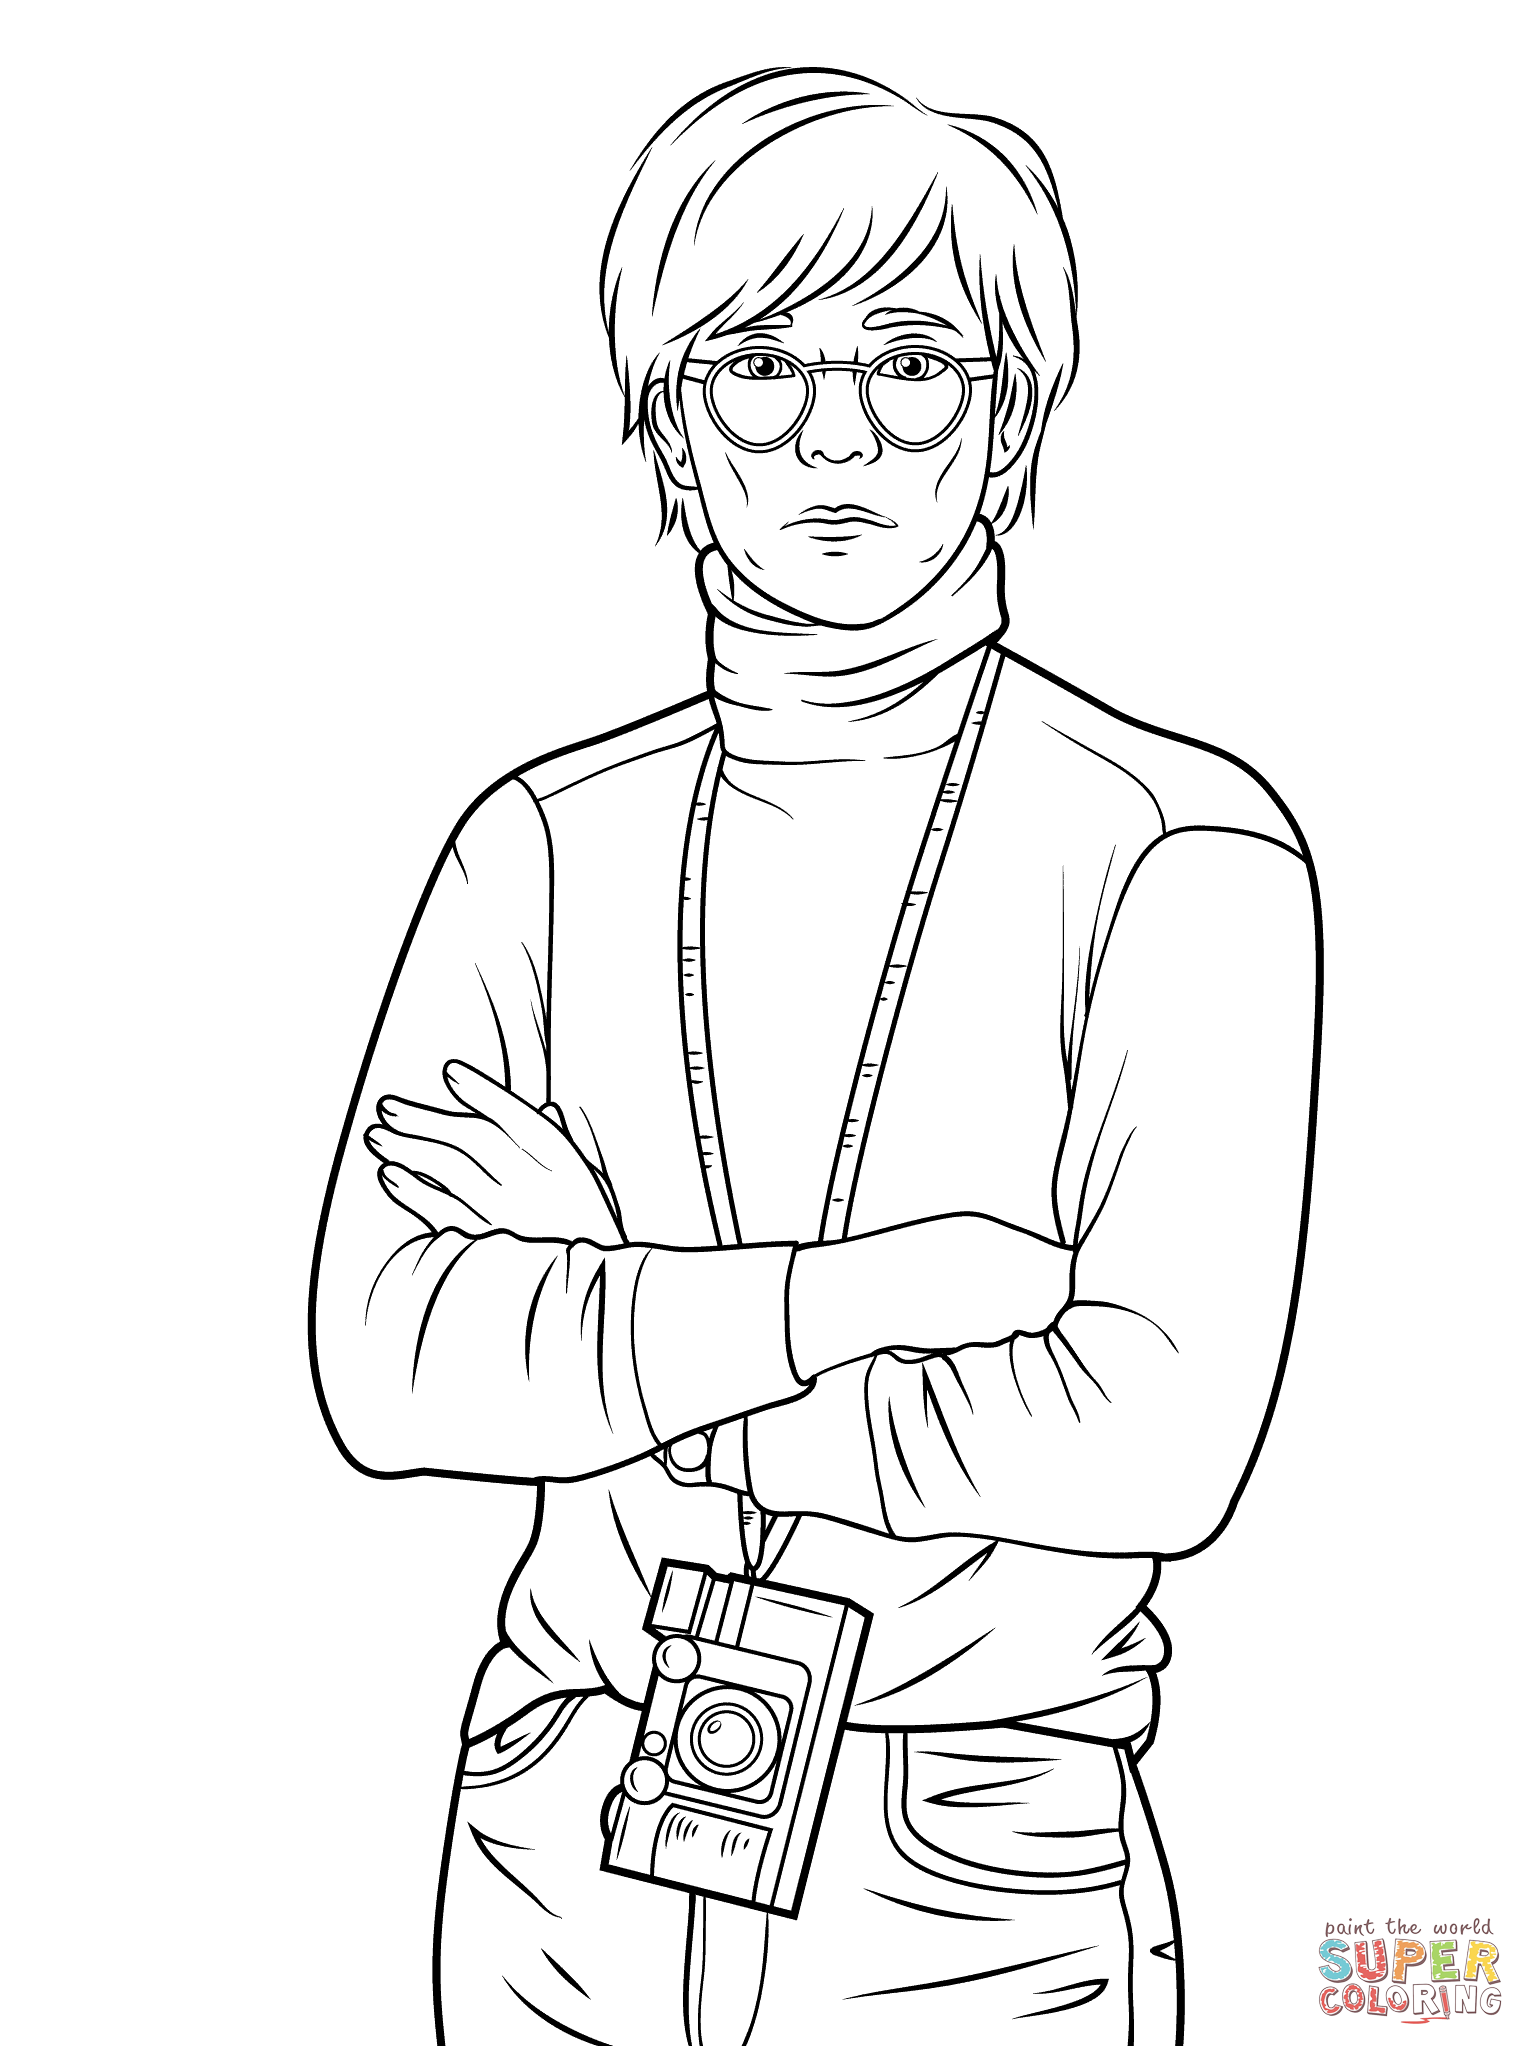 Andy Warhol coloring page | Free Printable Coloring Pages